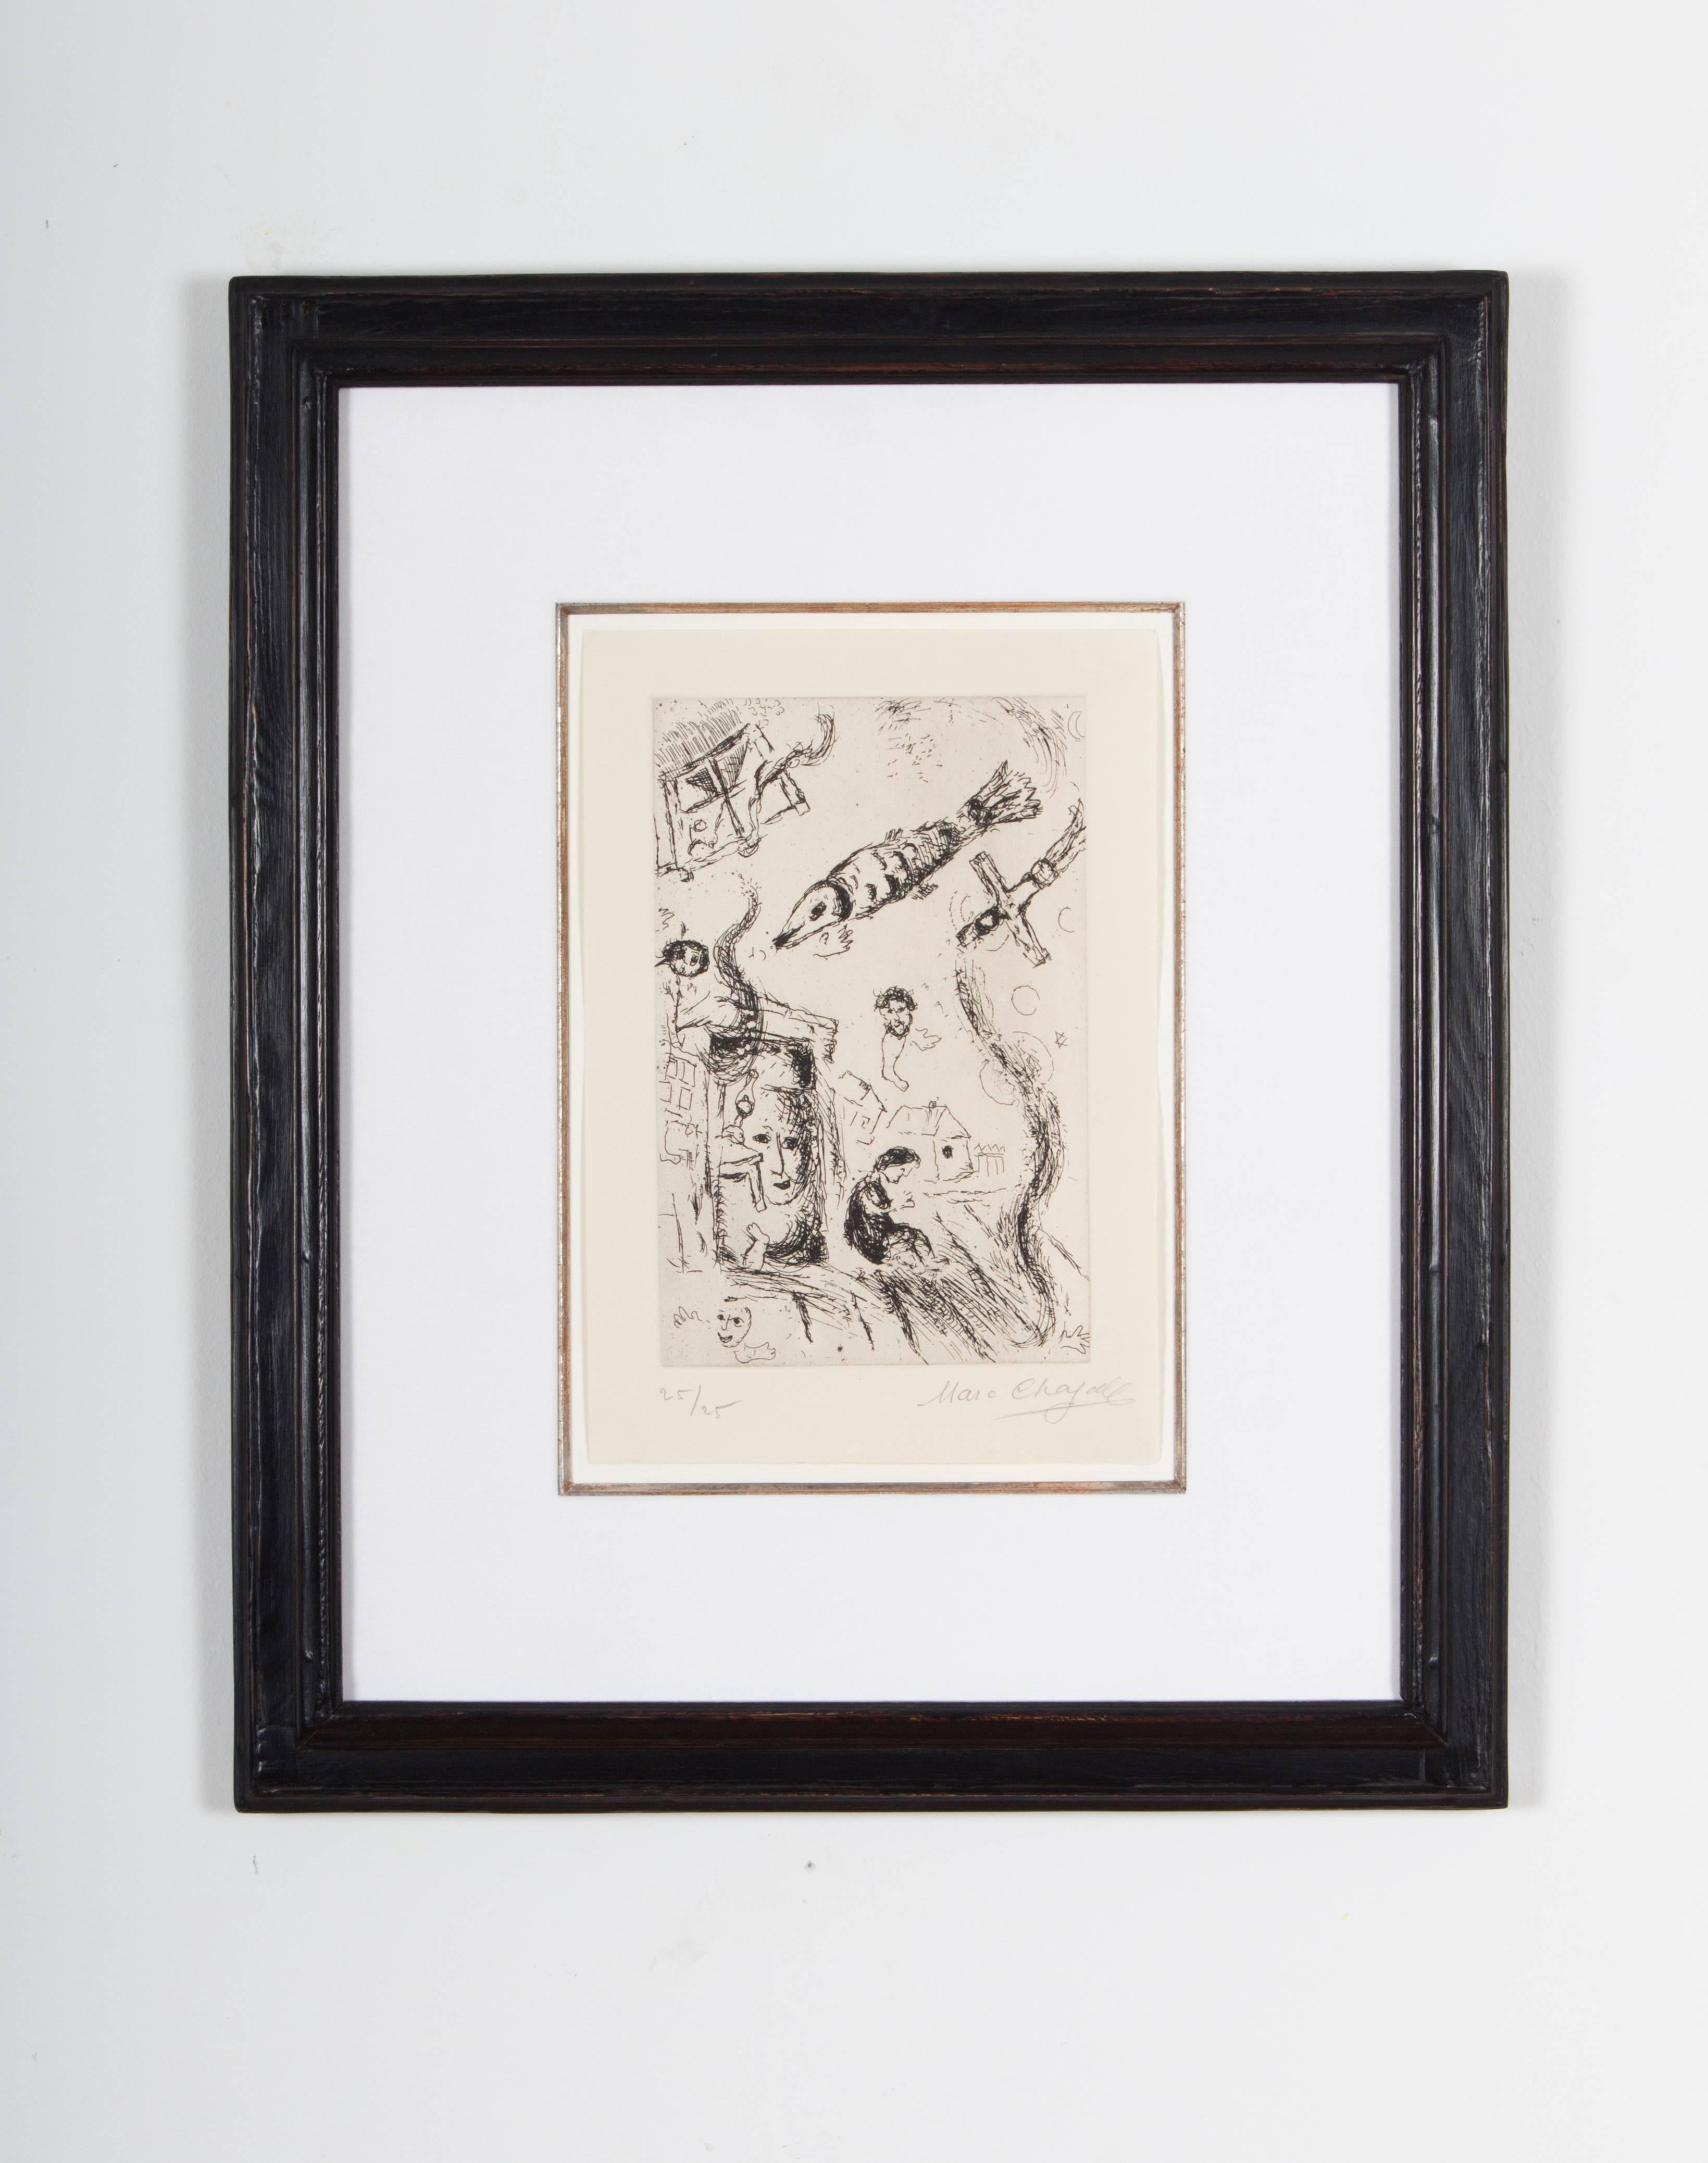 Titled with ''Lettre à Marc Chagall'', the work is one of five etchings for the similarly named publication by Jerzy Ficowski published in 1969 in Paris.

Printed by Lacourière & Frèlaut in Paris, the work is hand signed in pencil with ''Marc